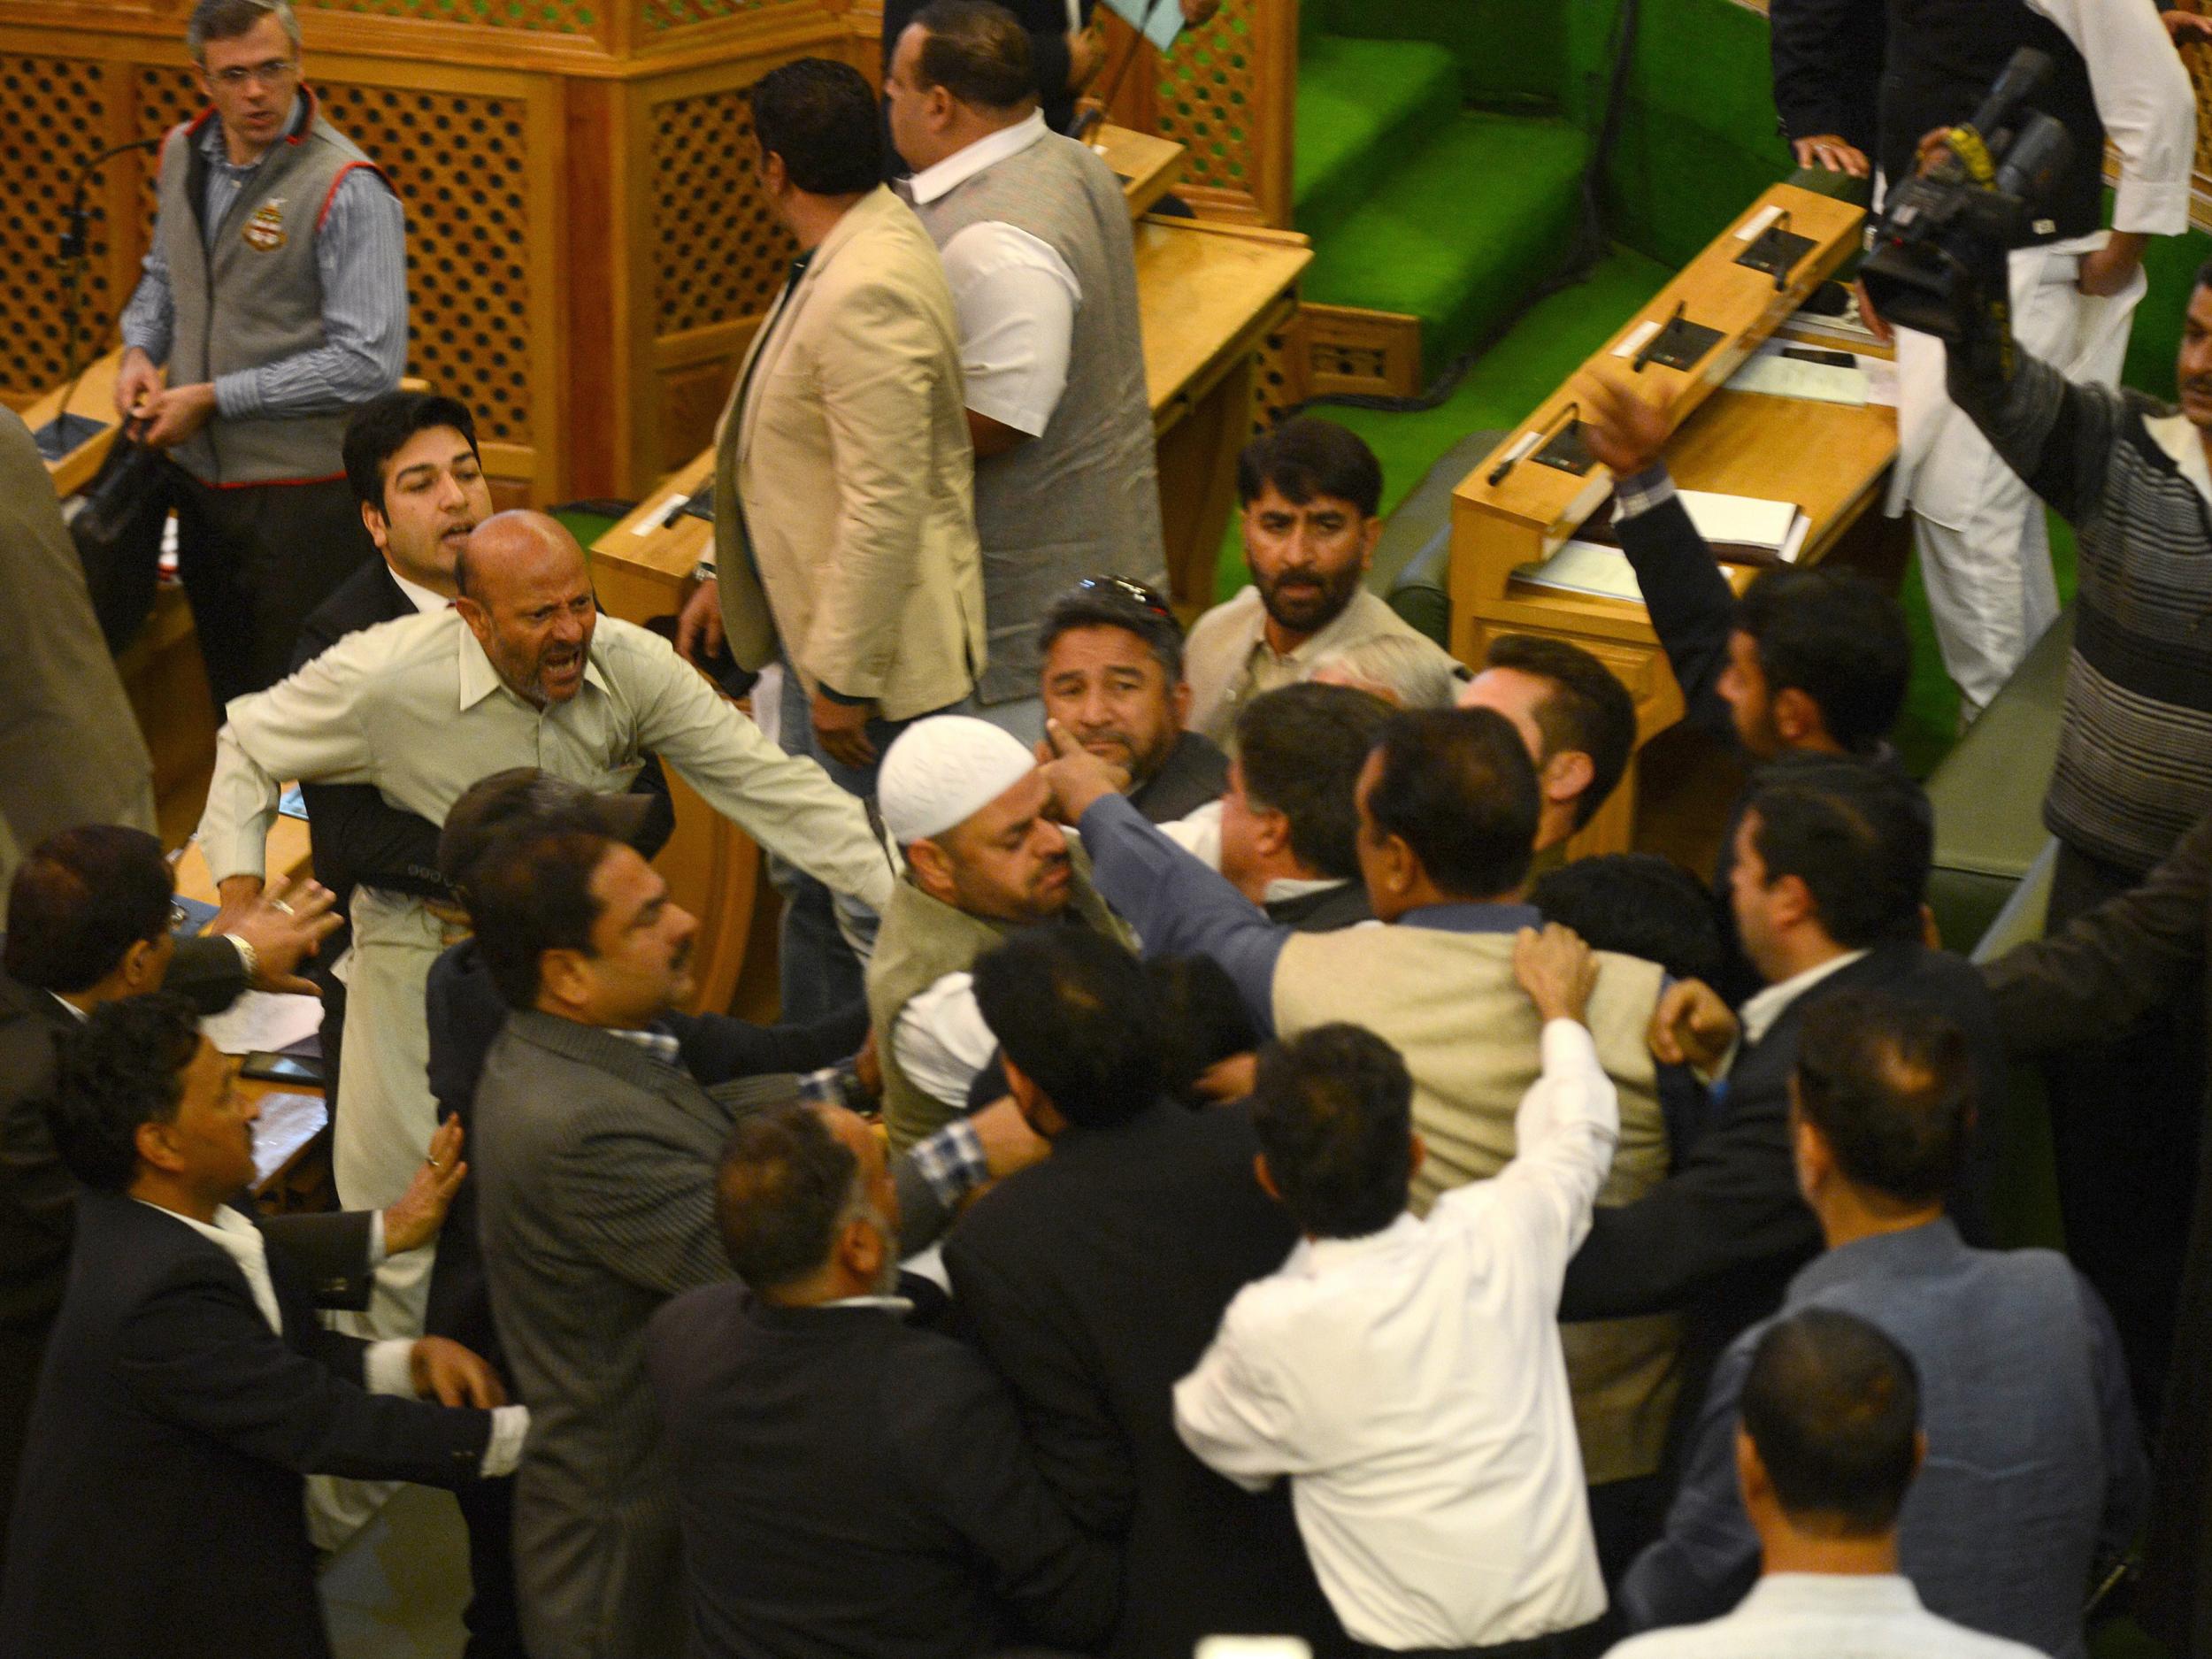 Fight breaks out in Kashmiri State Assembly after independent politician admits serving beef